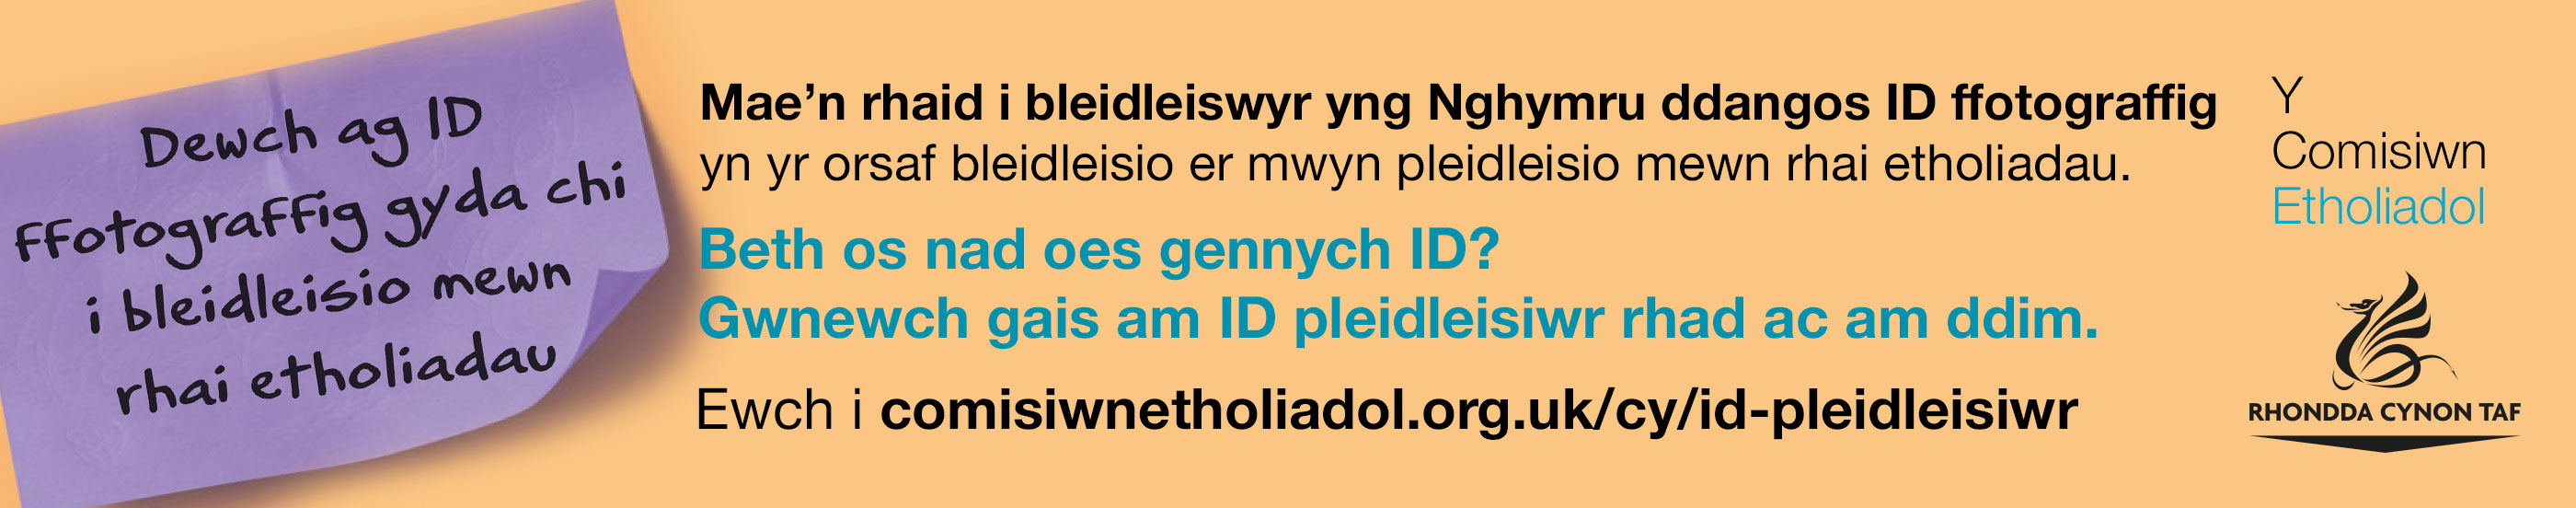 Voting-ID-Banner-Welsh